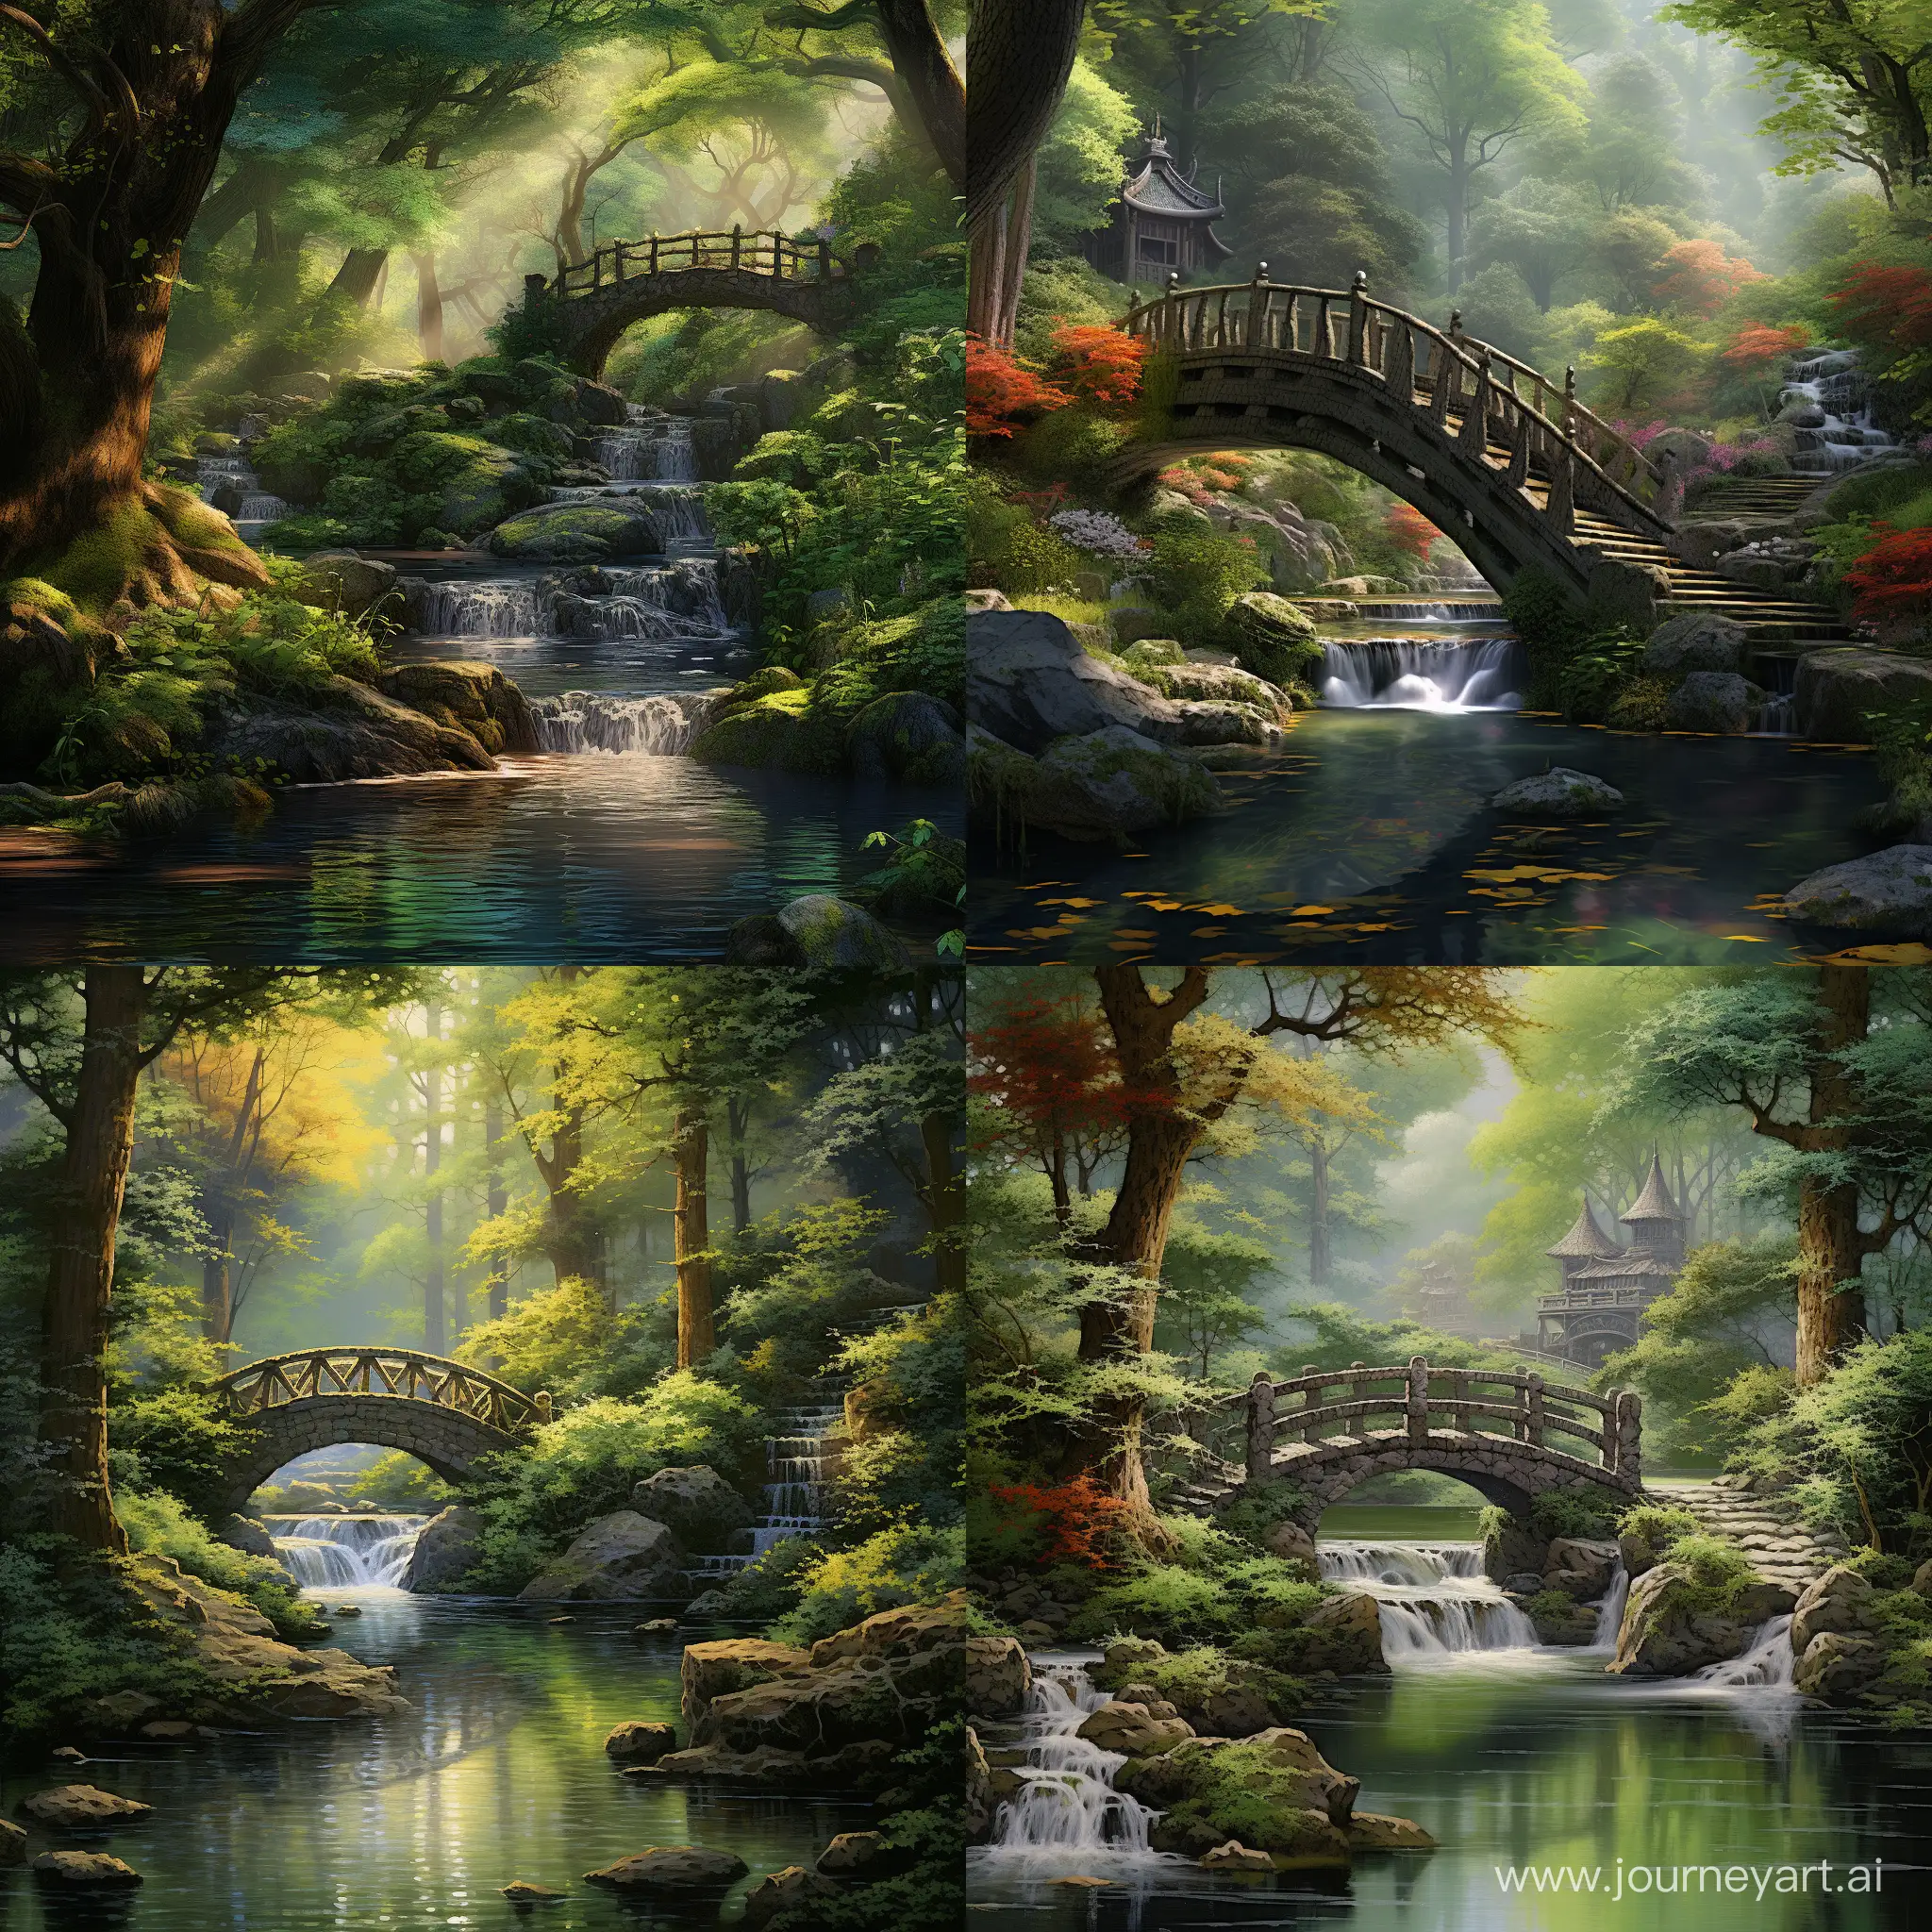 Tranquil-Water-Haven-Enchanting-Stream-and-Wooden-Bridge-Amidst-Nature